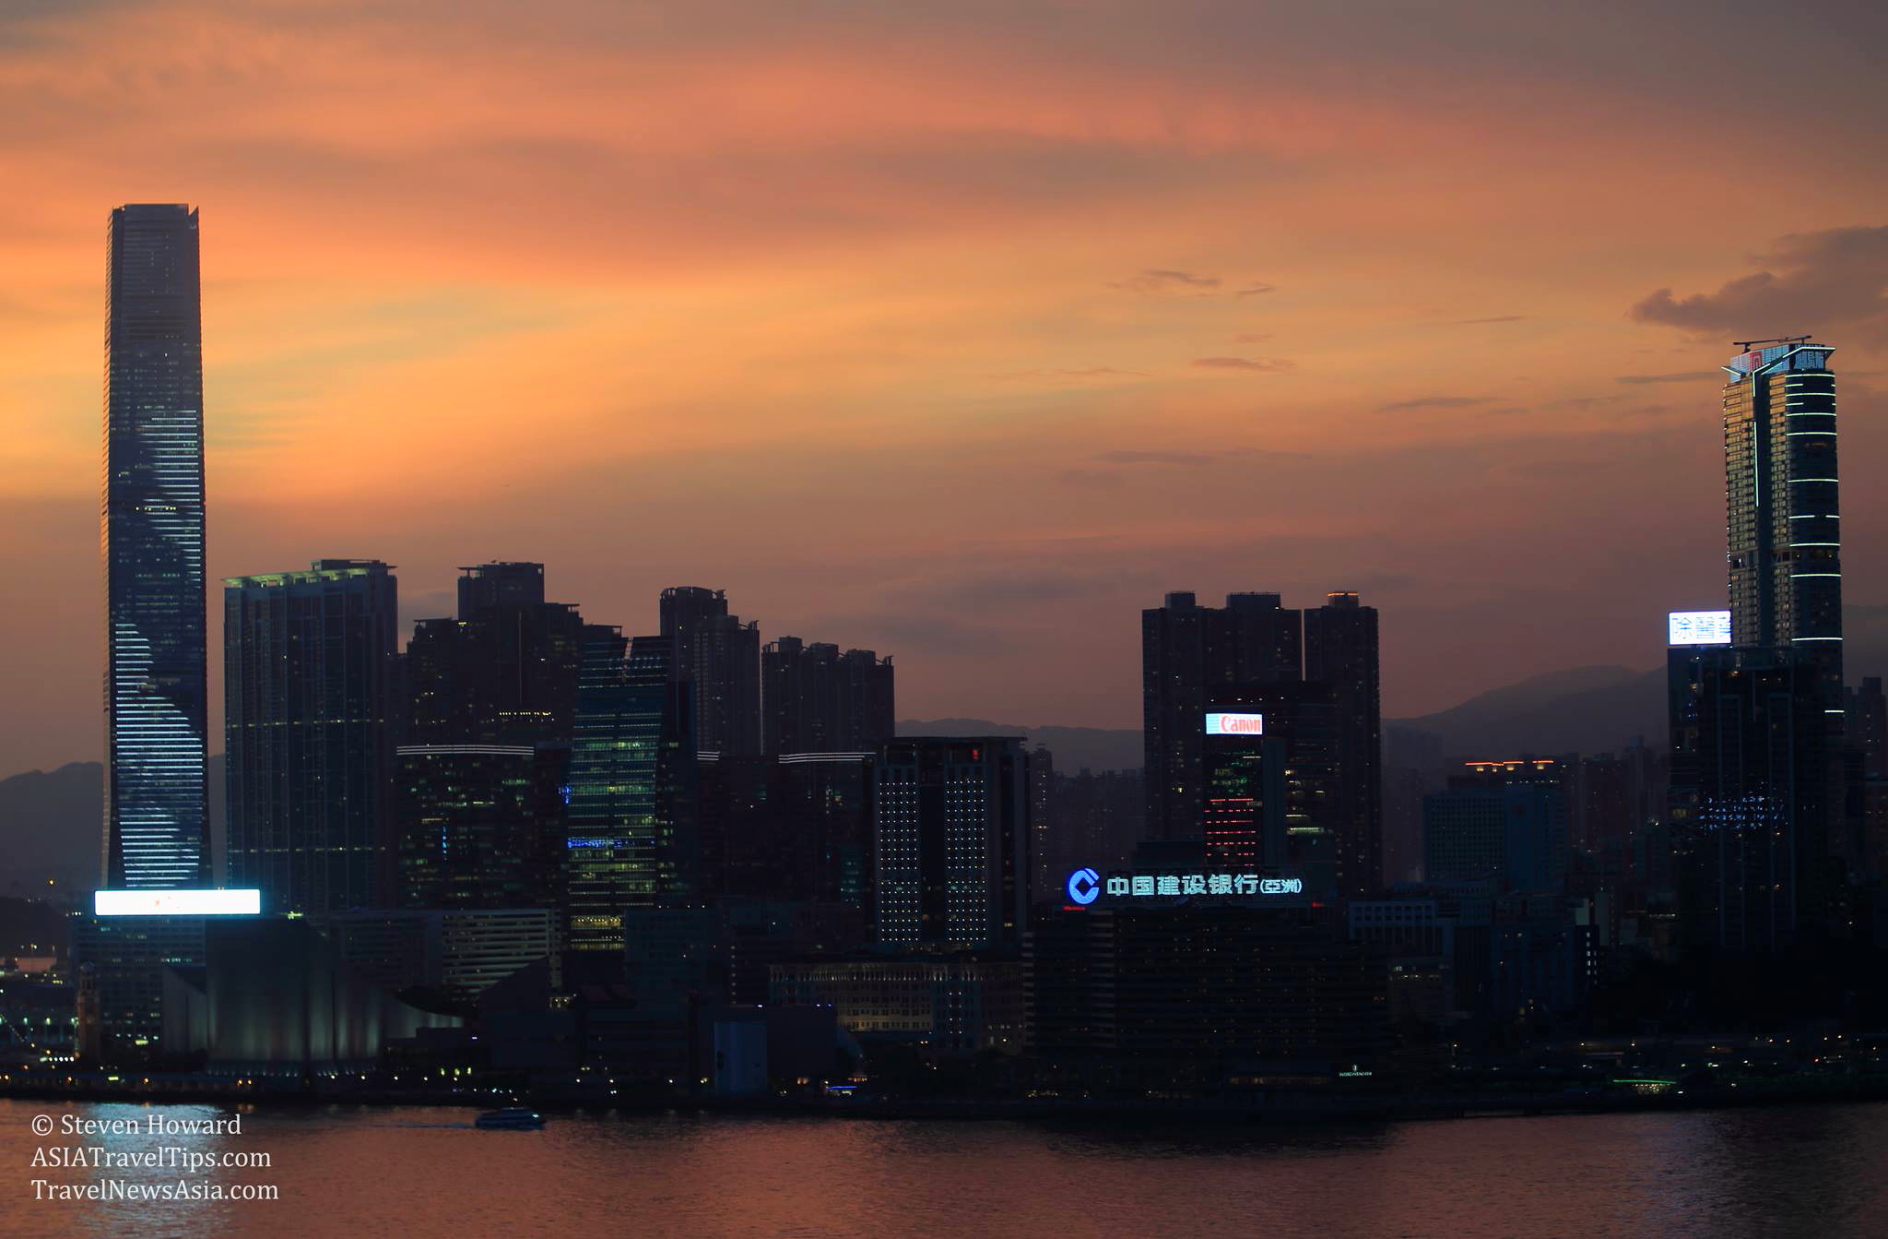 Hong Kong. Picture by Steven Howard of TravelNewsAsia.comClick to enlarge.